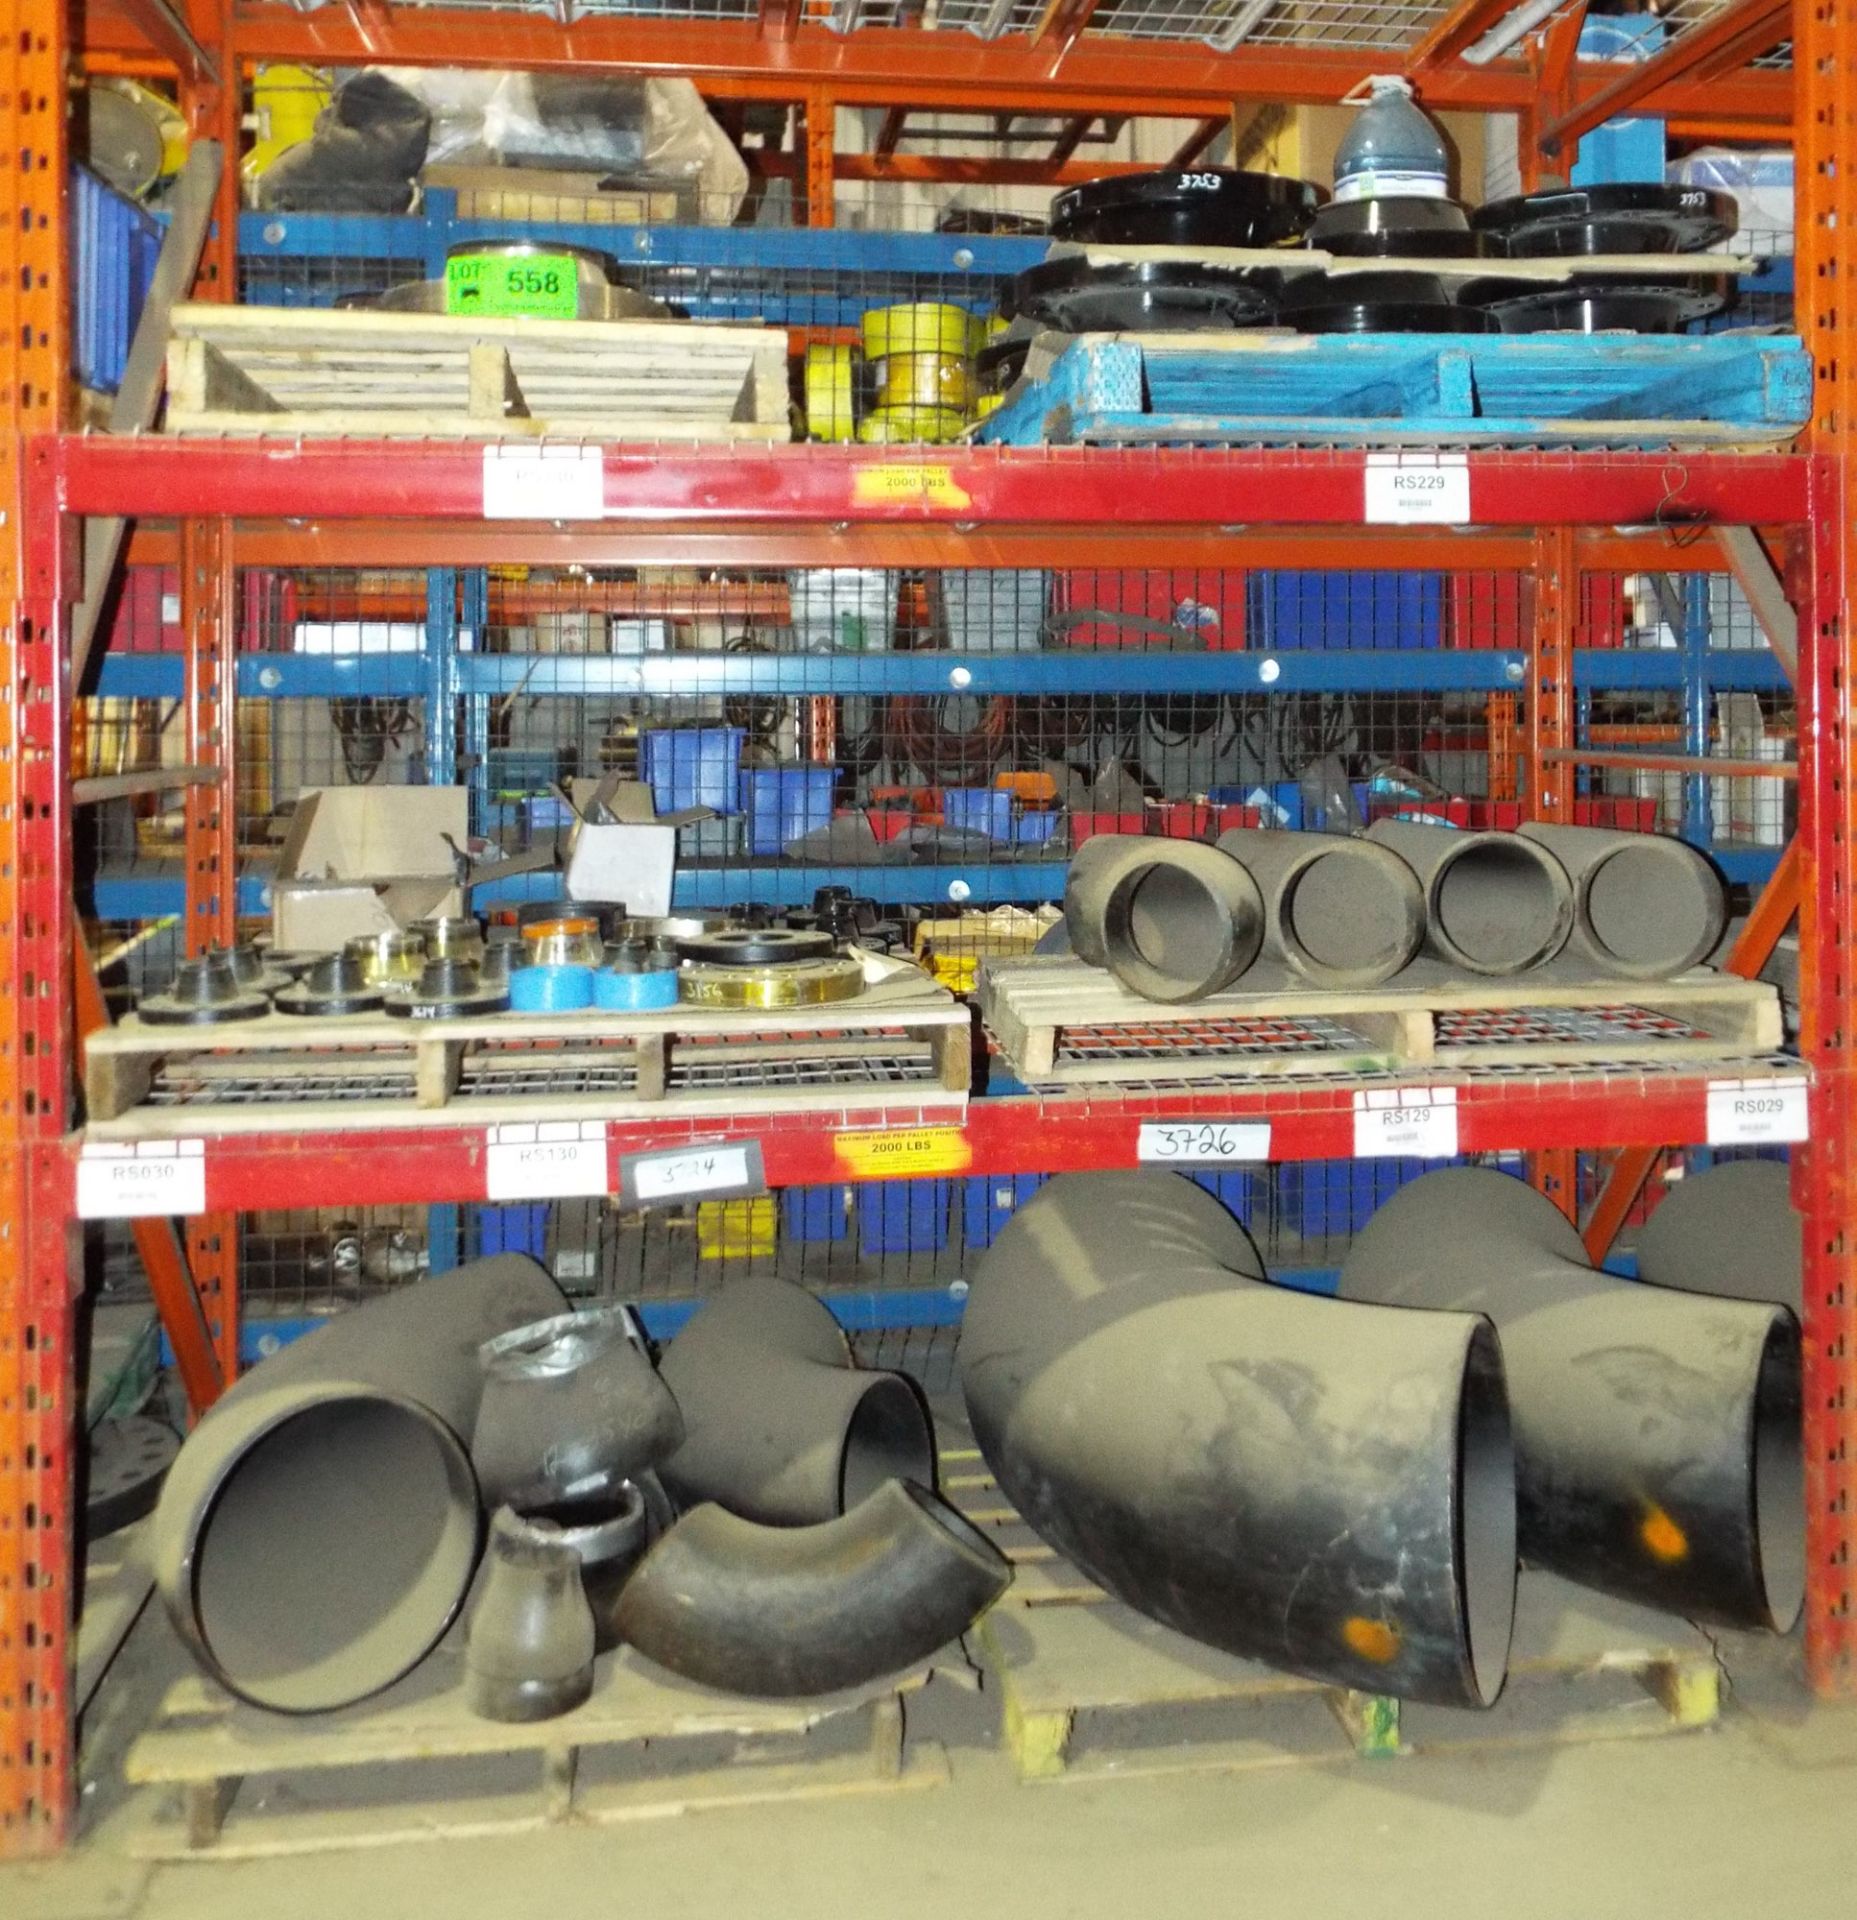 LOT/ CONTENTS OF RACK INCLUDING PIPES AND PIPE FITTING HARDWARE